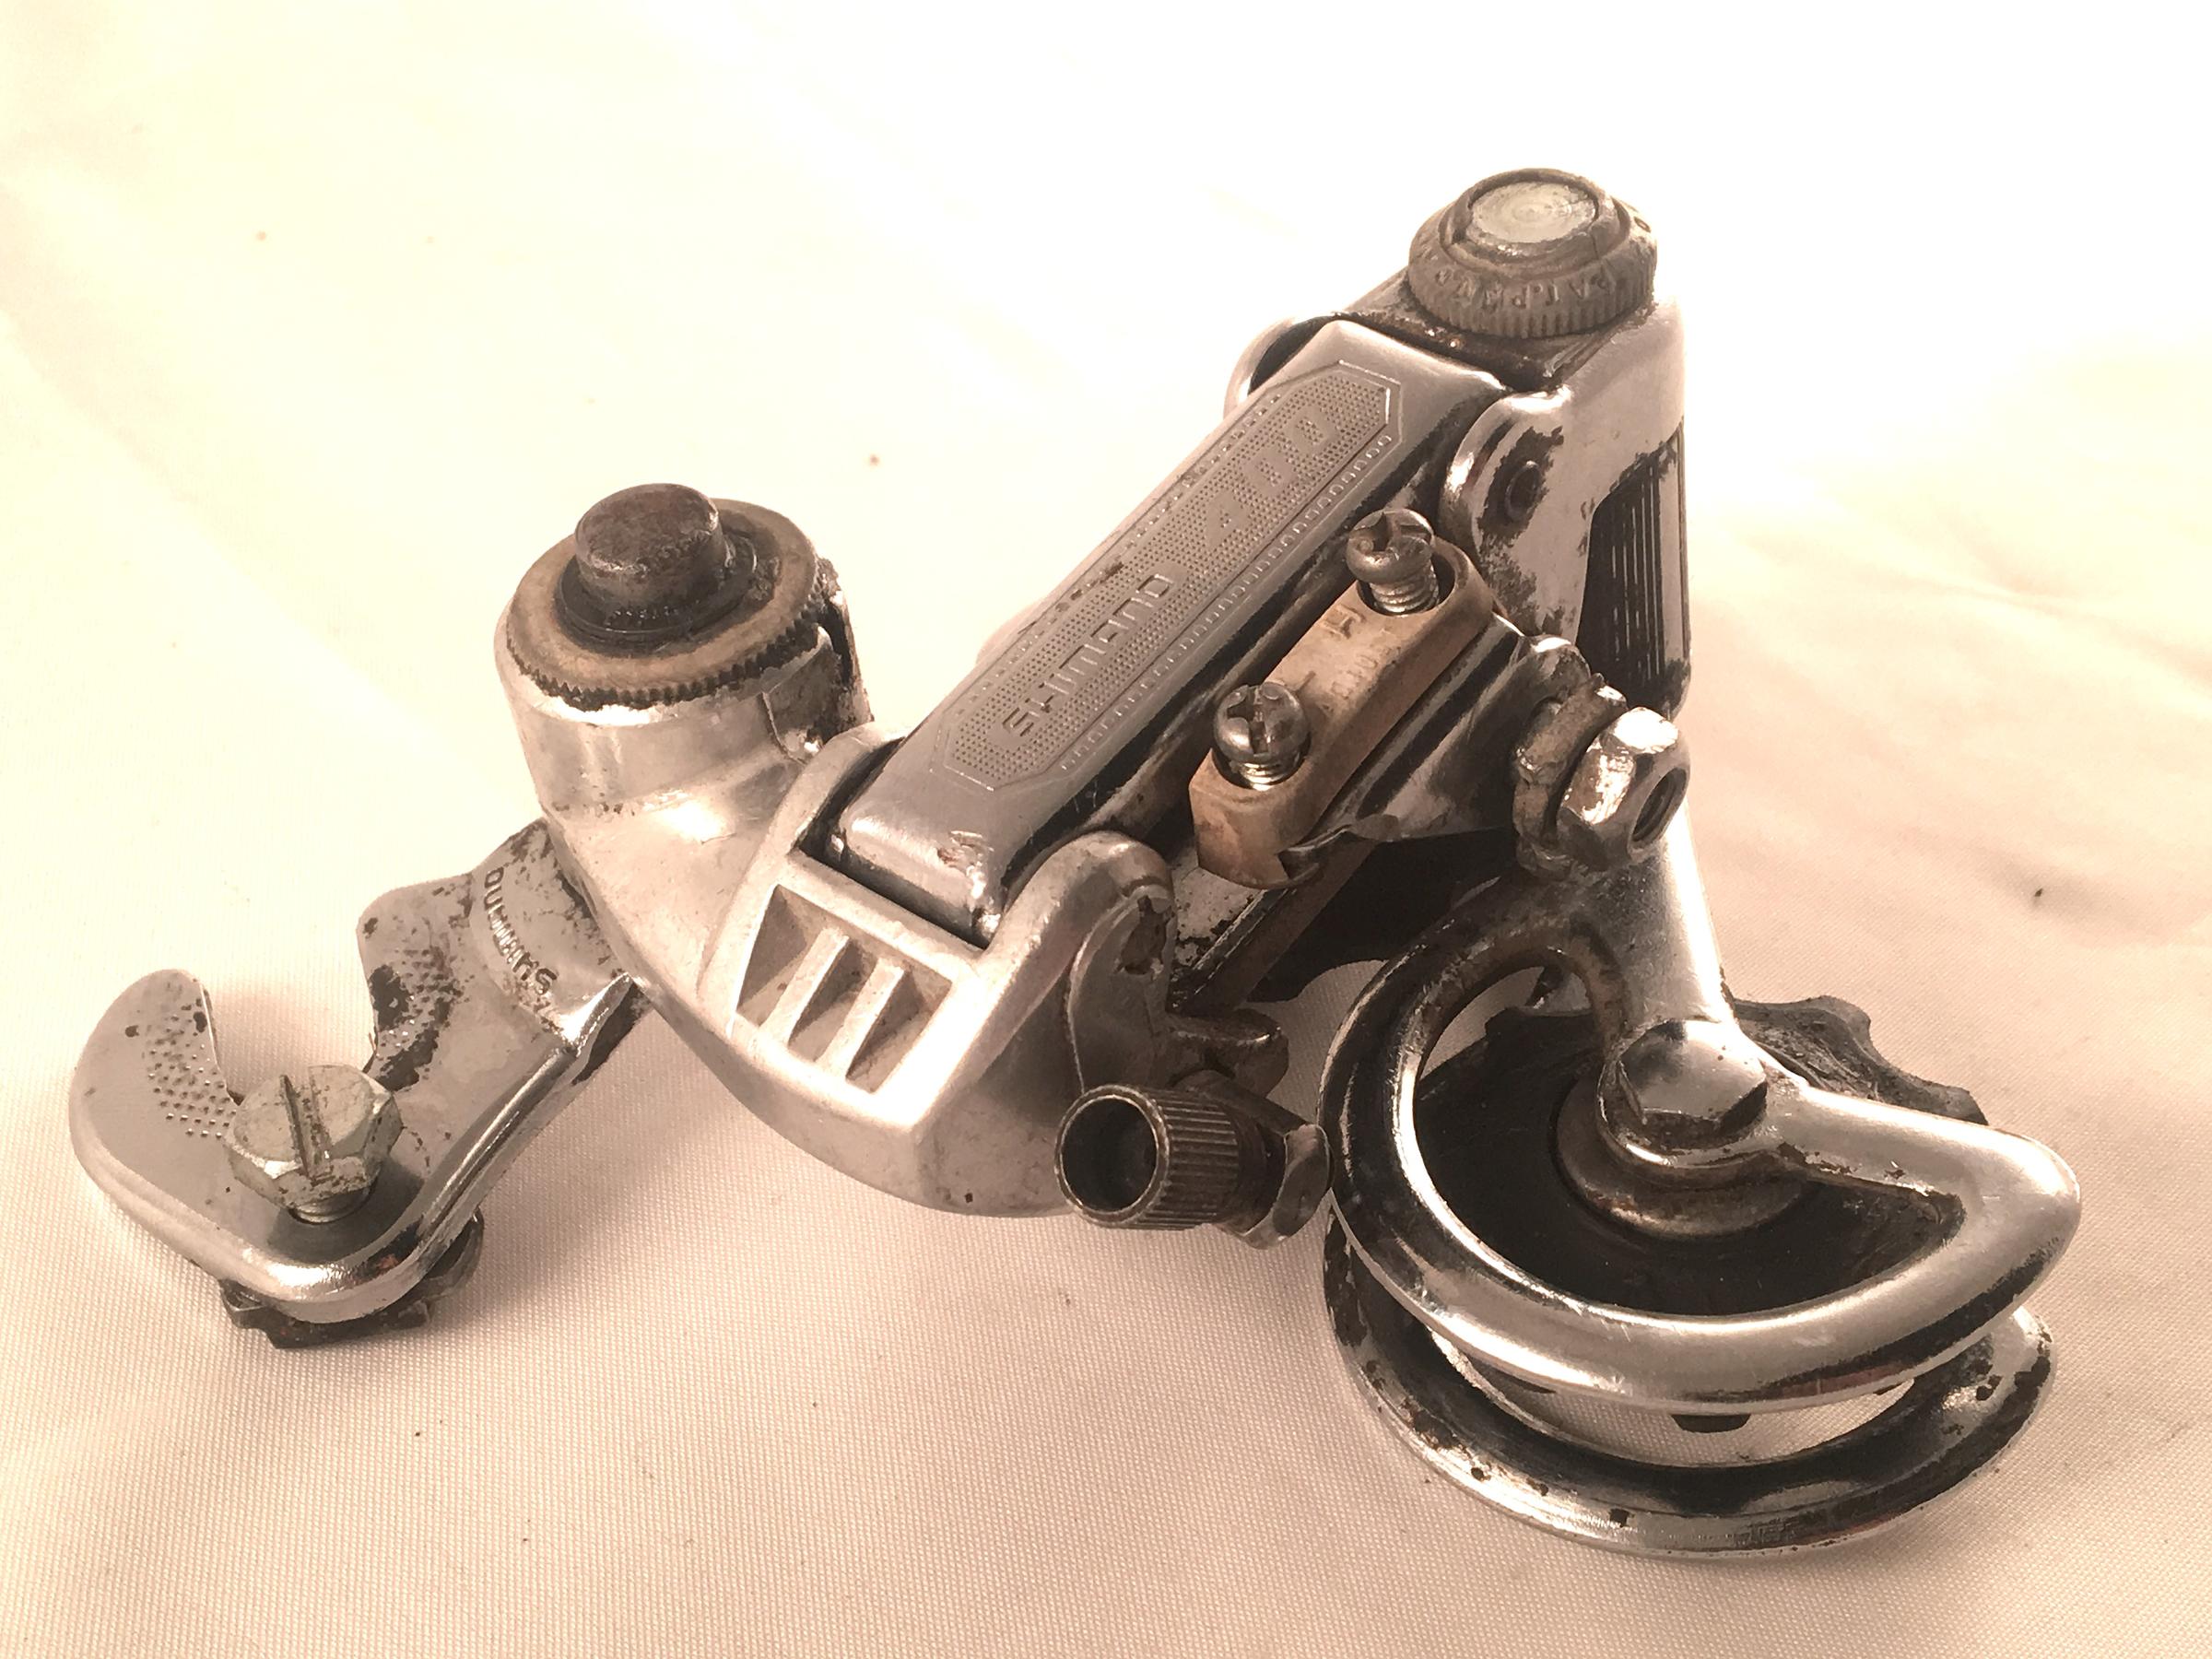 front and rear derailleur